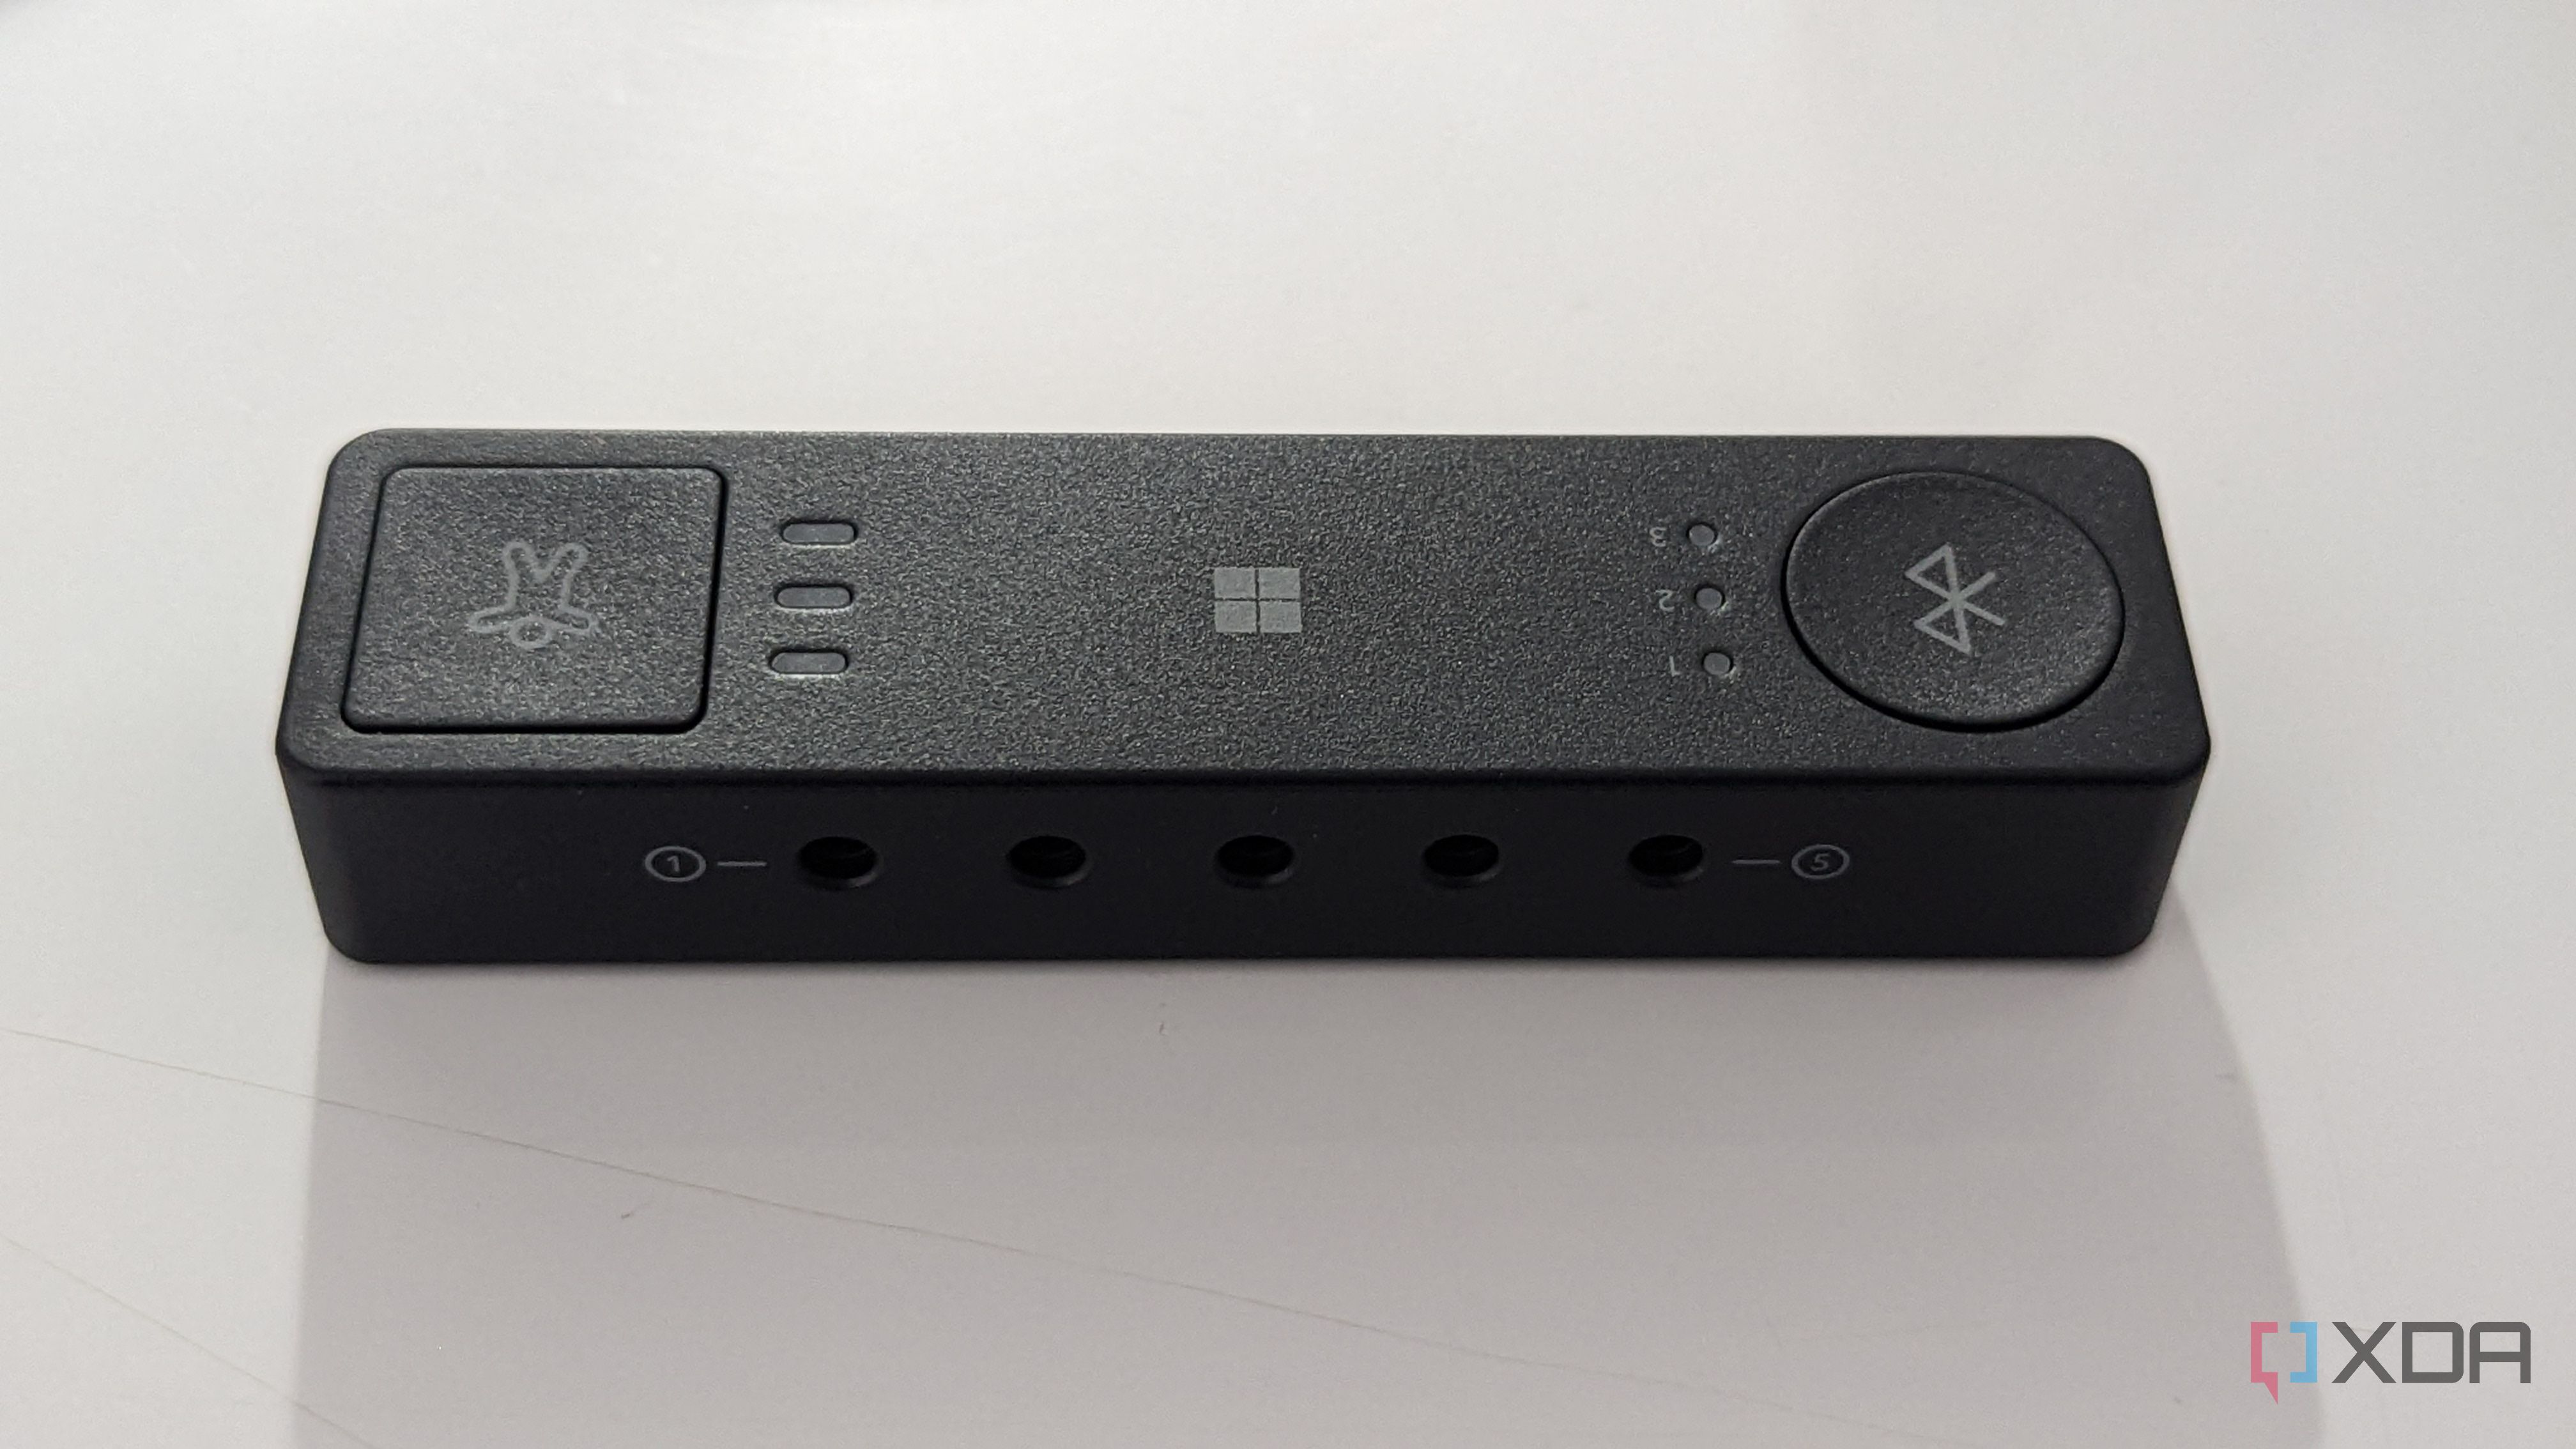 The rear of the Microsoft Adaptive Hub showing the 3.5mm ports